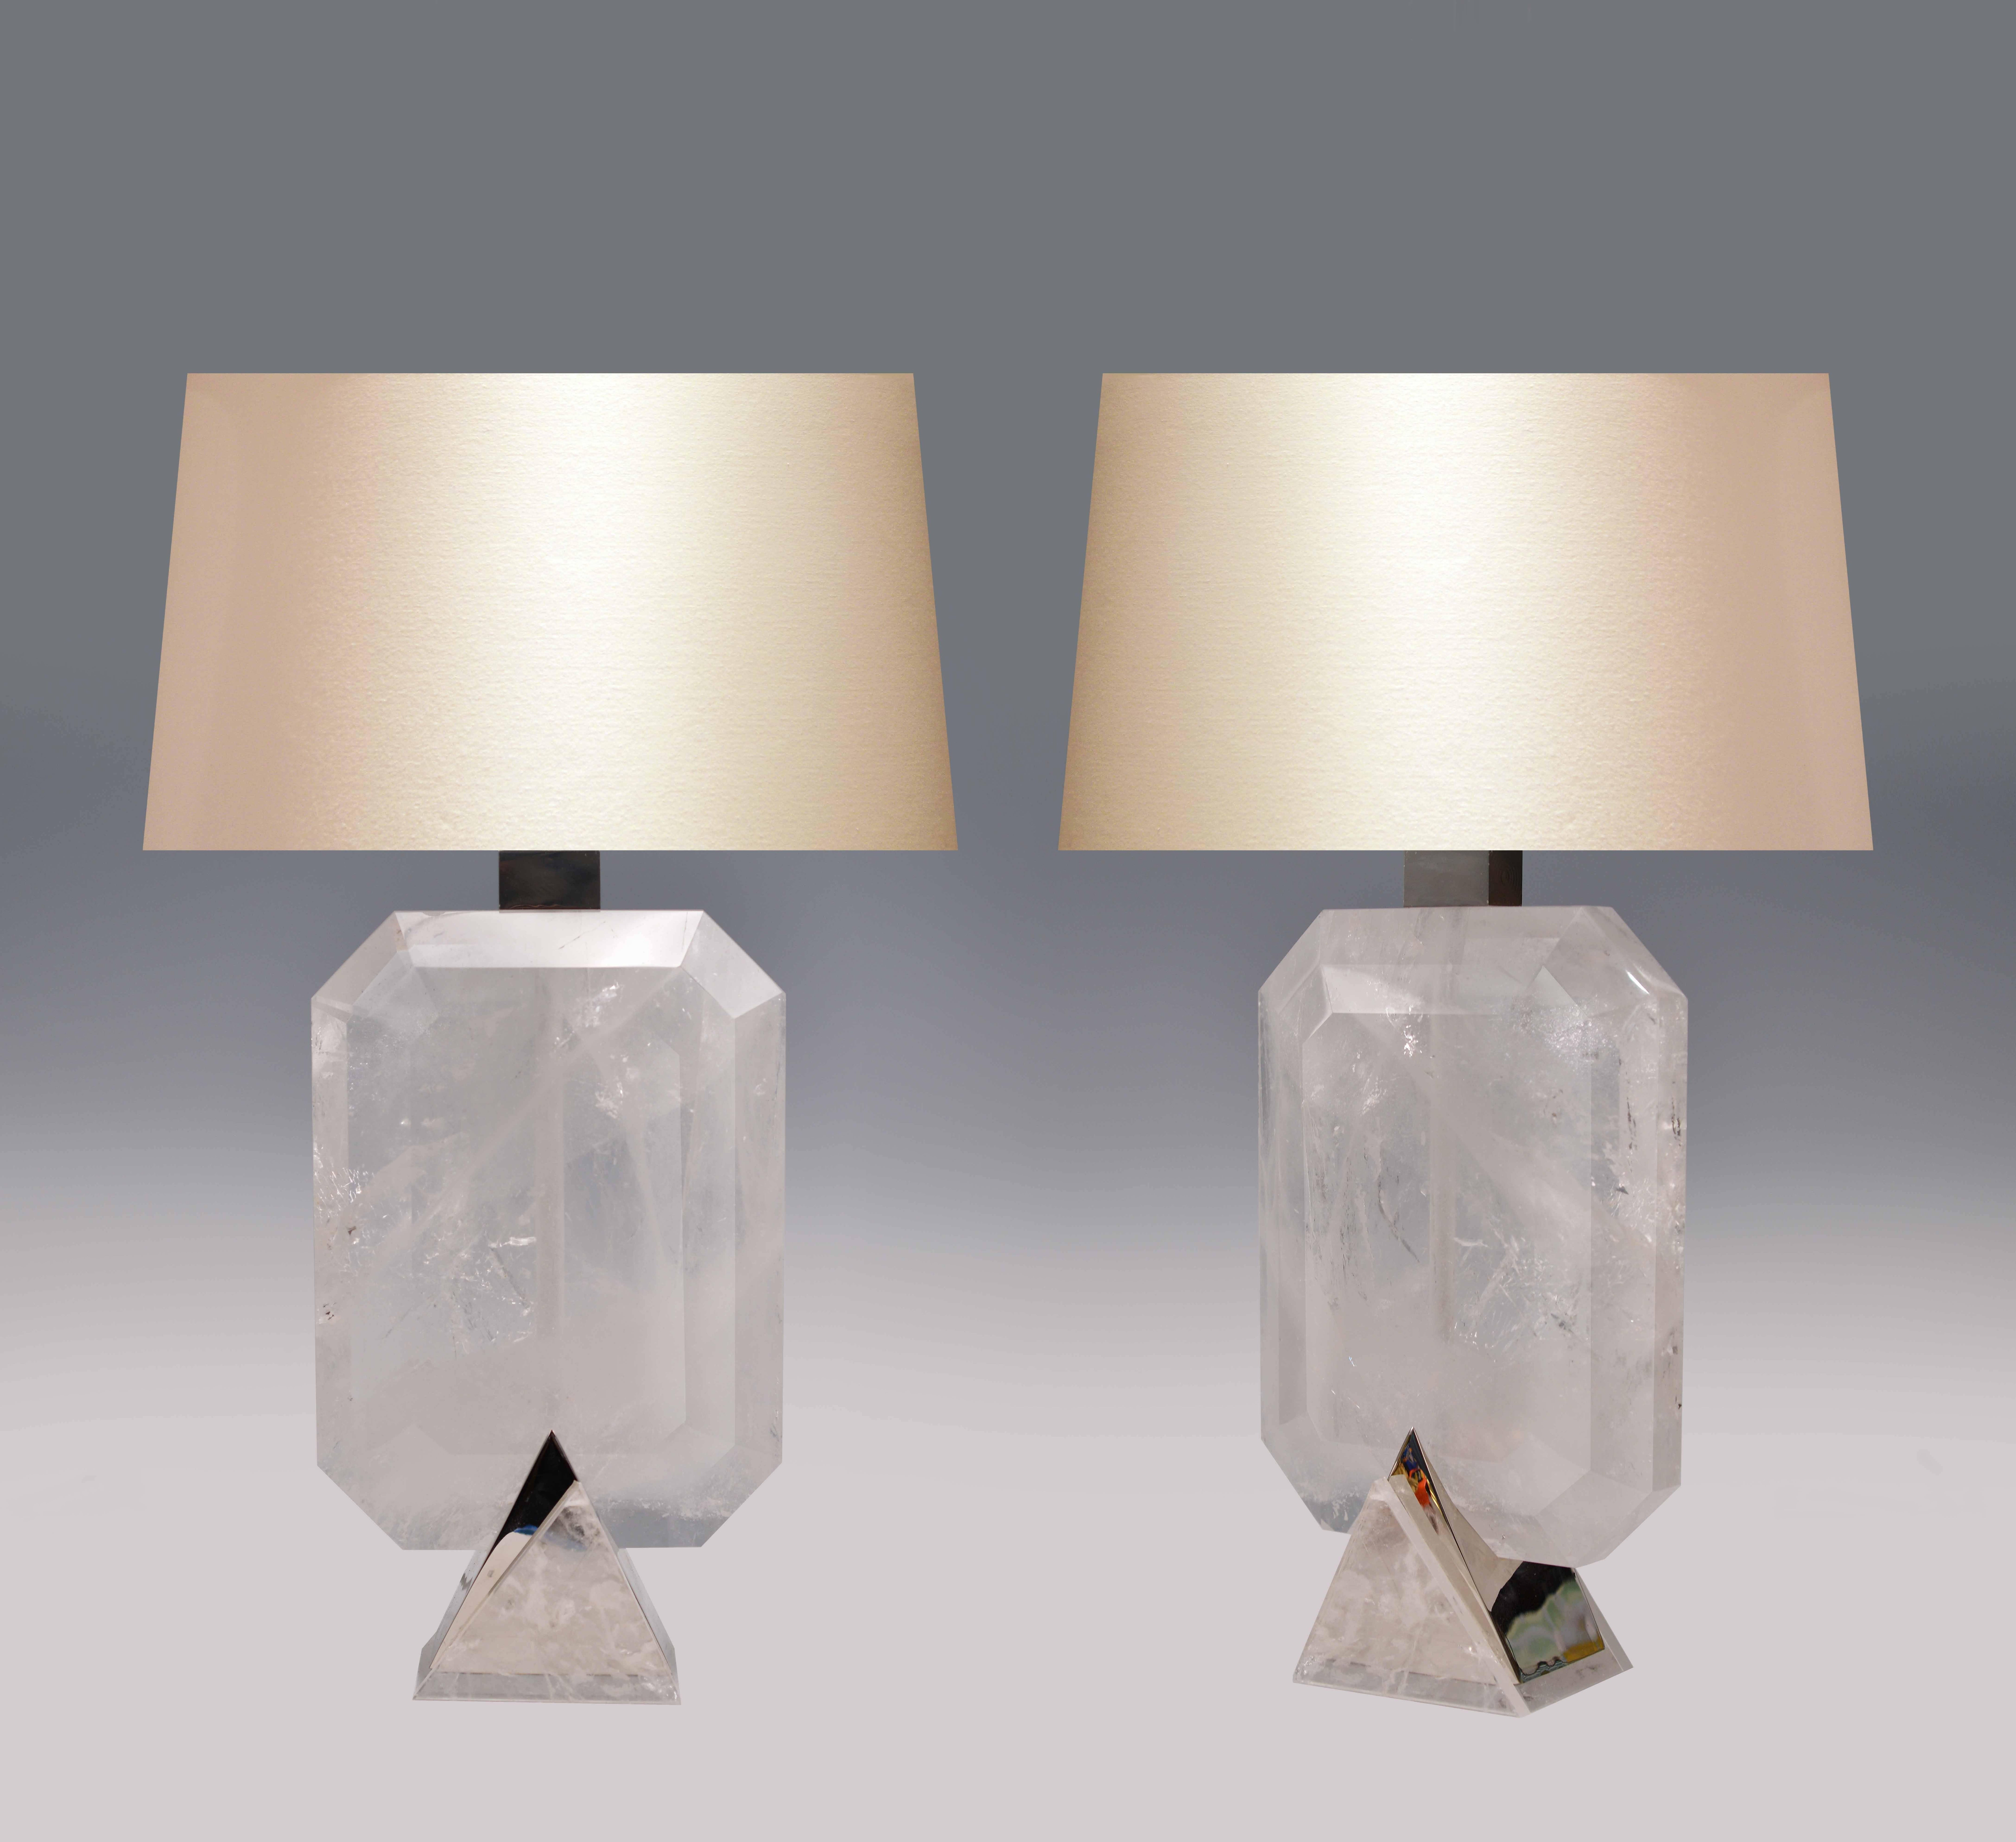 Pair of fine carved diamond form rock crystal lamps with nickel-plated bases, created by Phoenix Gallery, NYC.

To the top of rock crystal height: 13.5 inch.
(Lampshade not included).